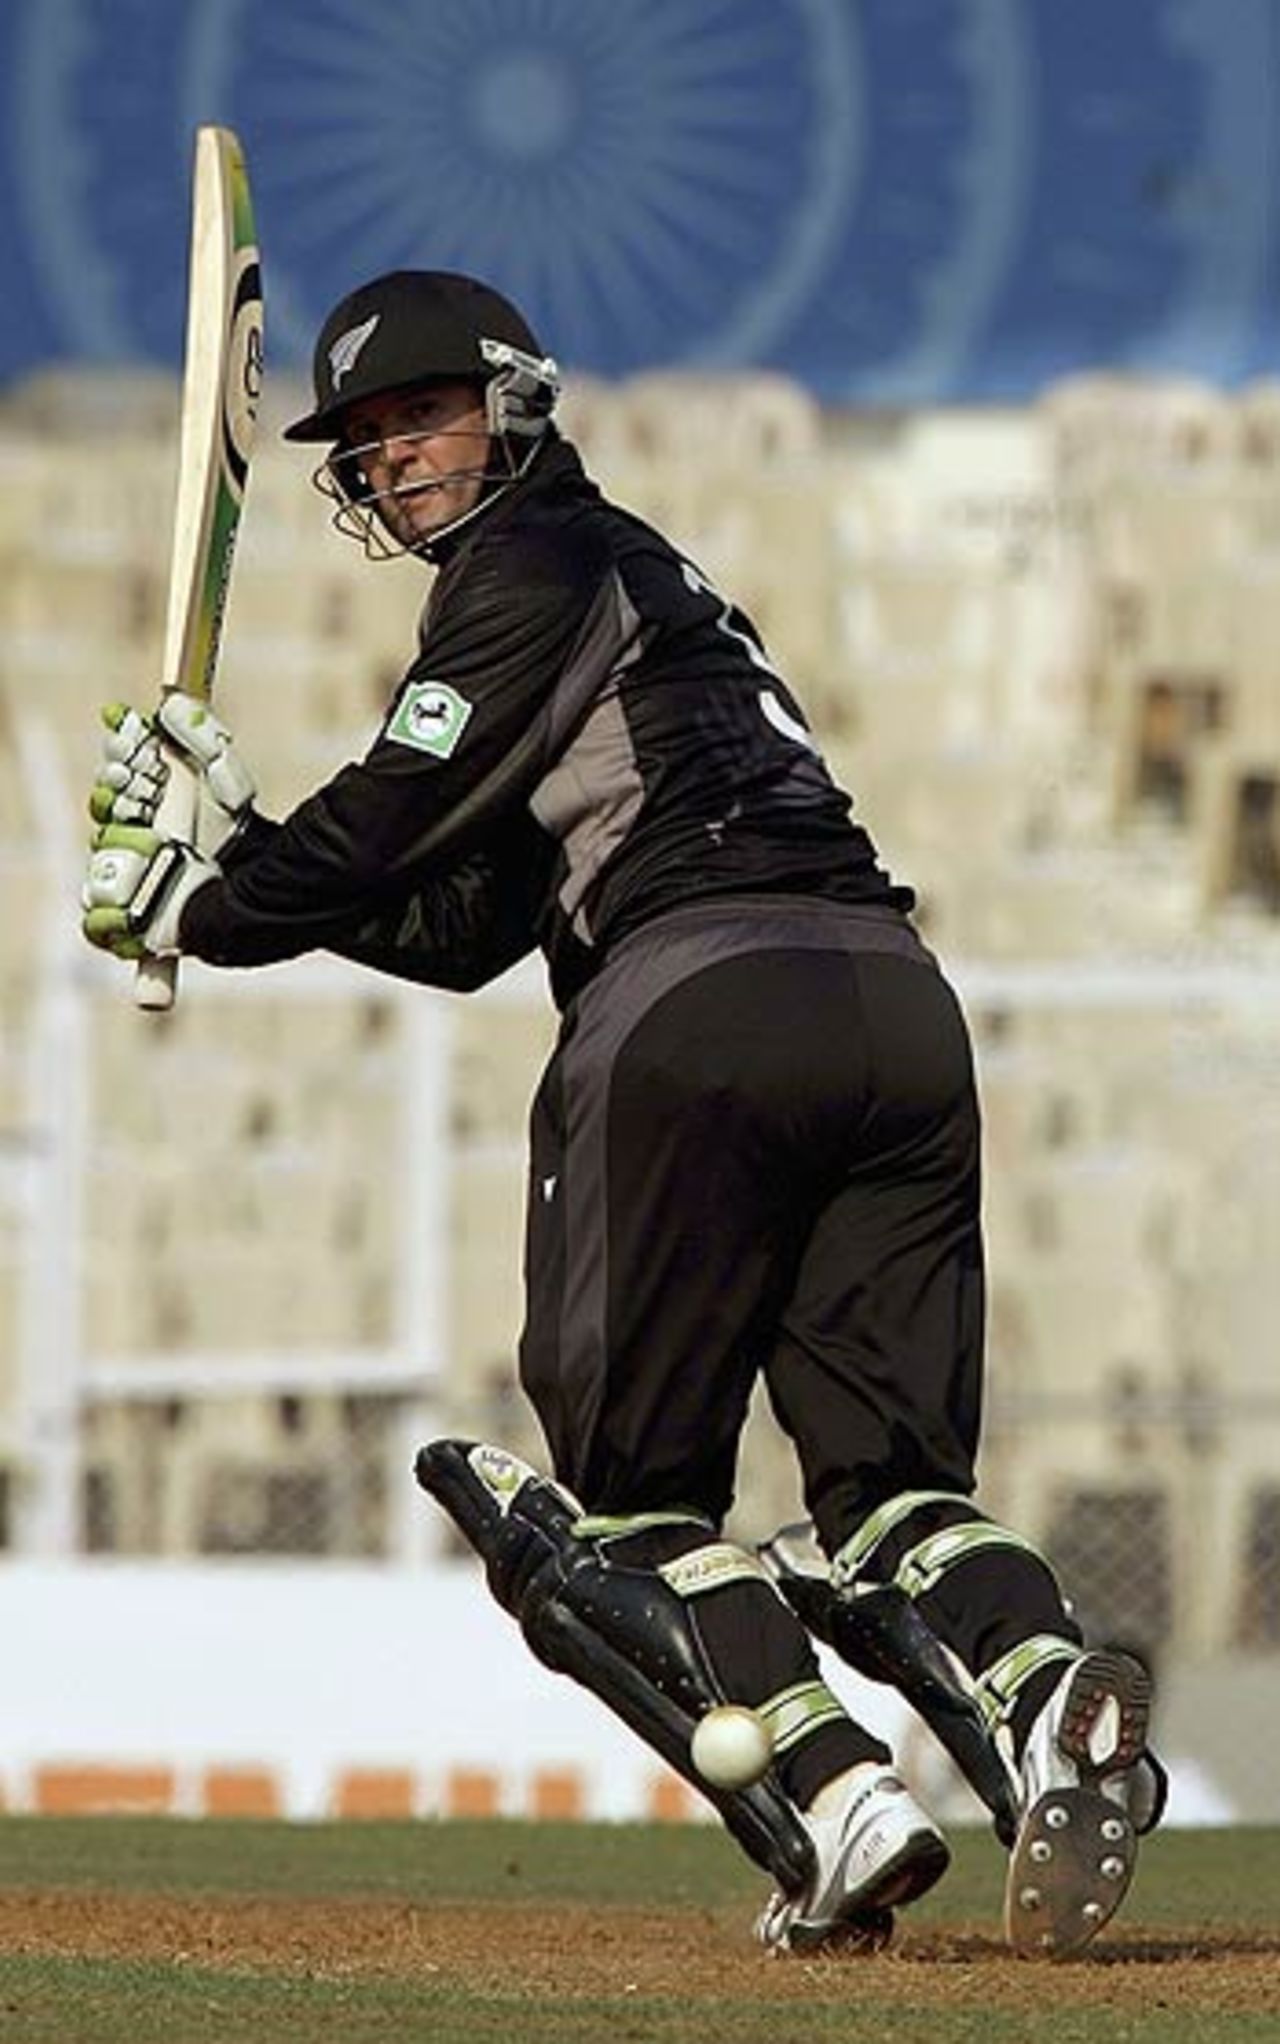 Nathan Astle flicks off his pads, New Zealand v South Africa, 2nd Match, Champions Trophy, Mumbai, October 16, 2006